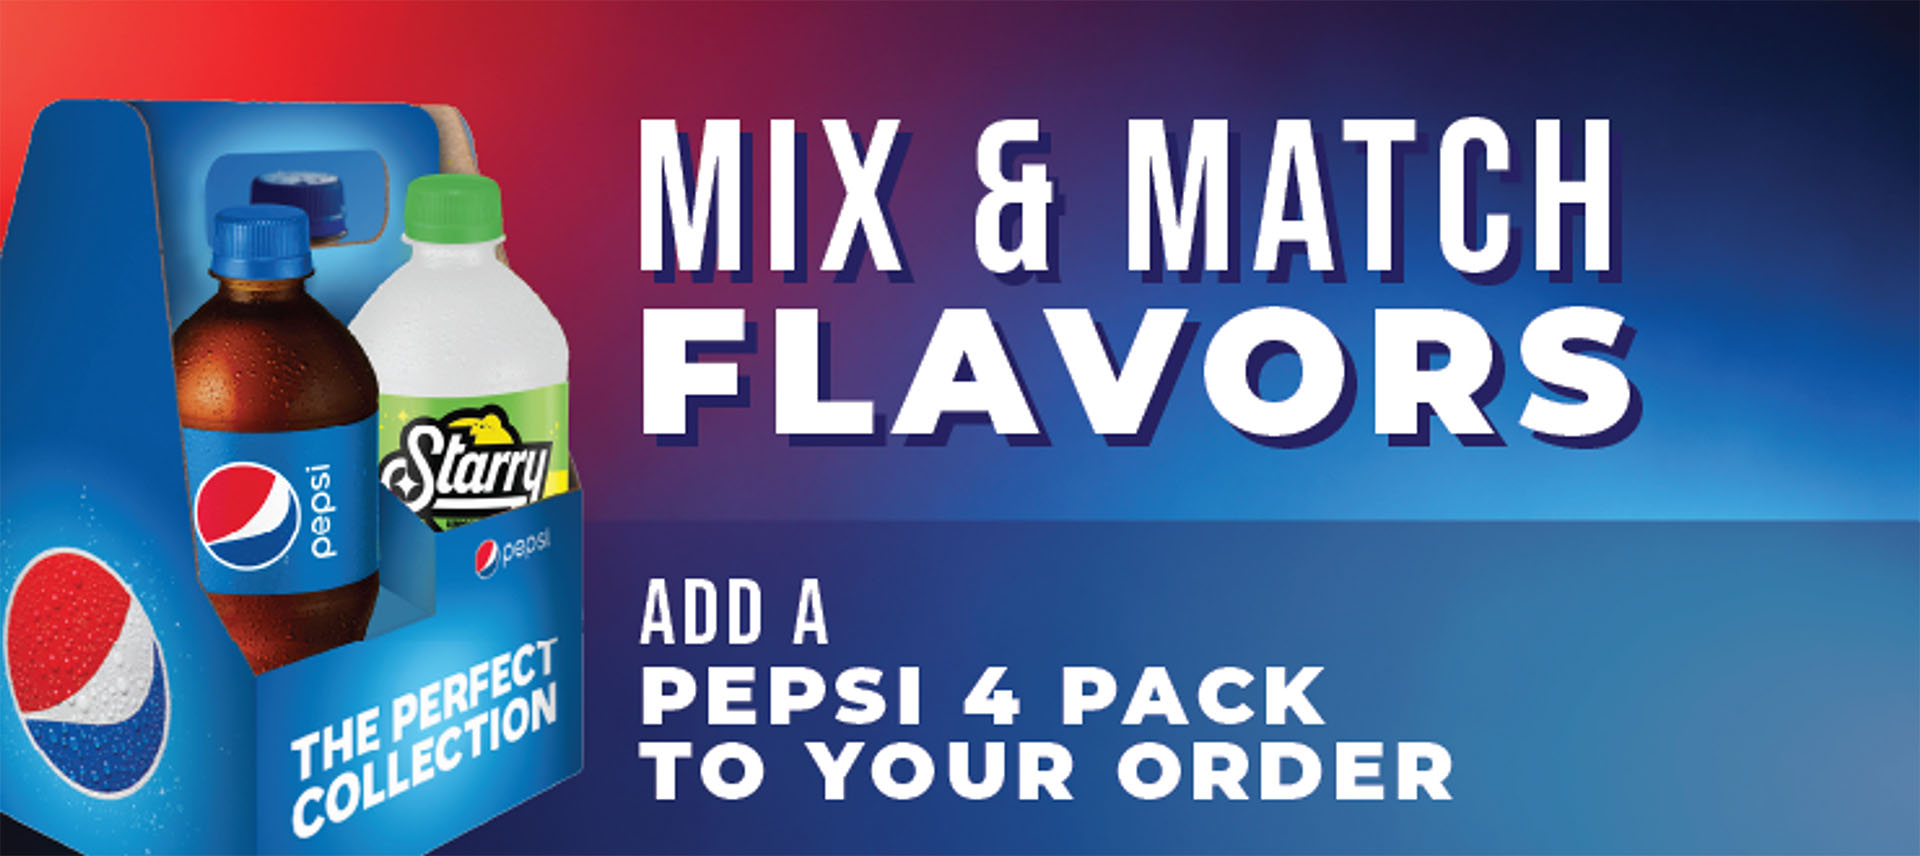 Mix and match flavors! Add a Pepsi 4-pack to your order